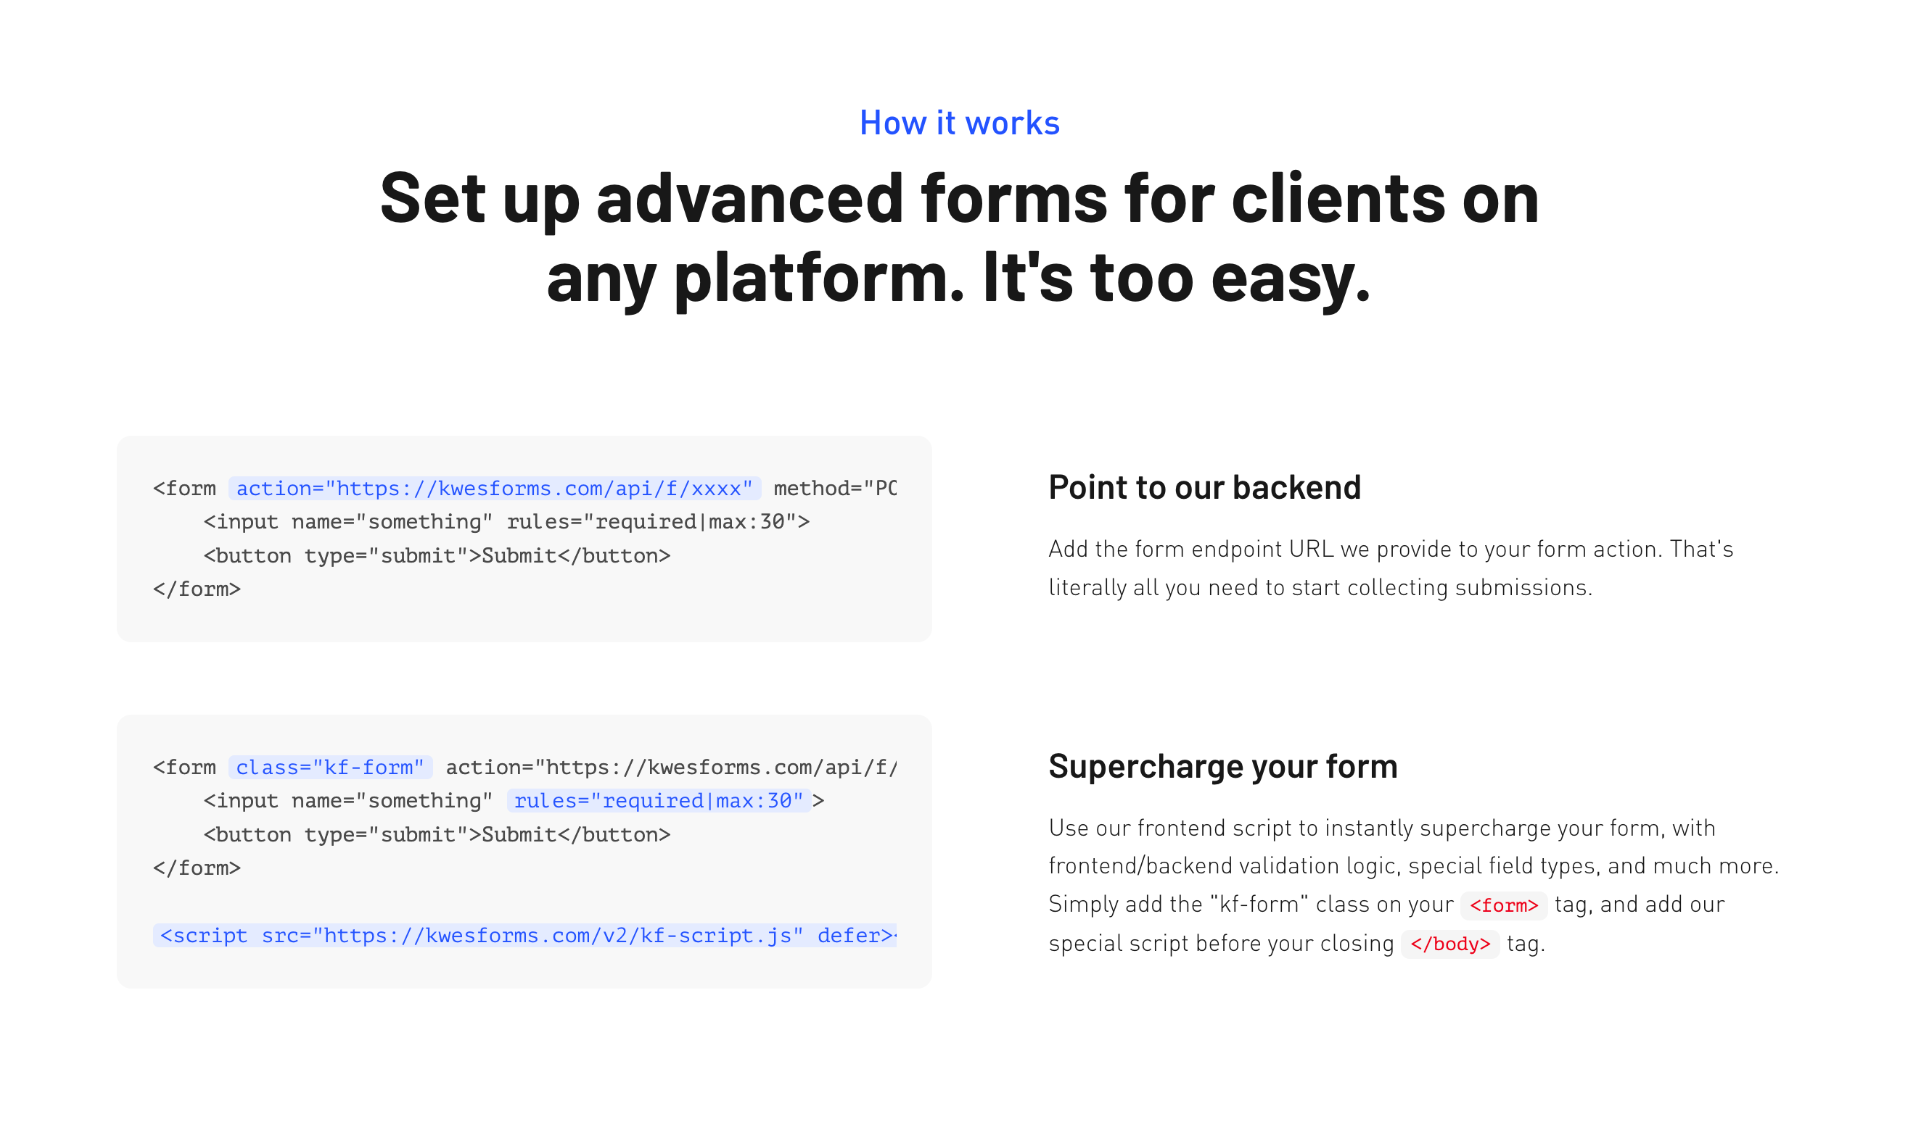 kwesforms - The most complete form service for developers